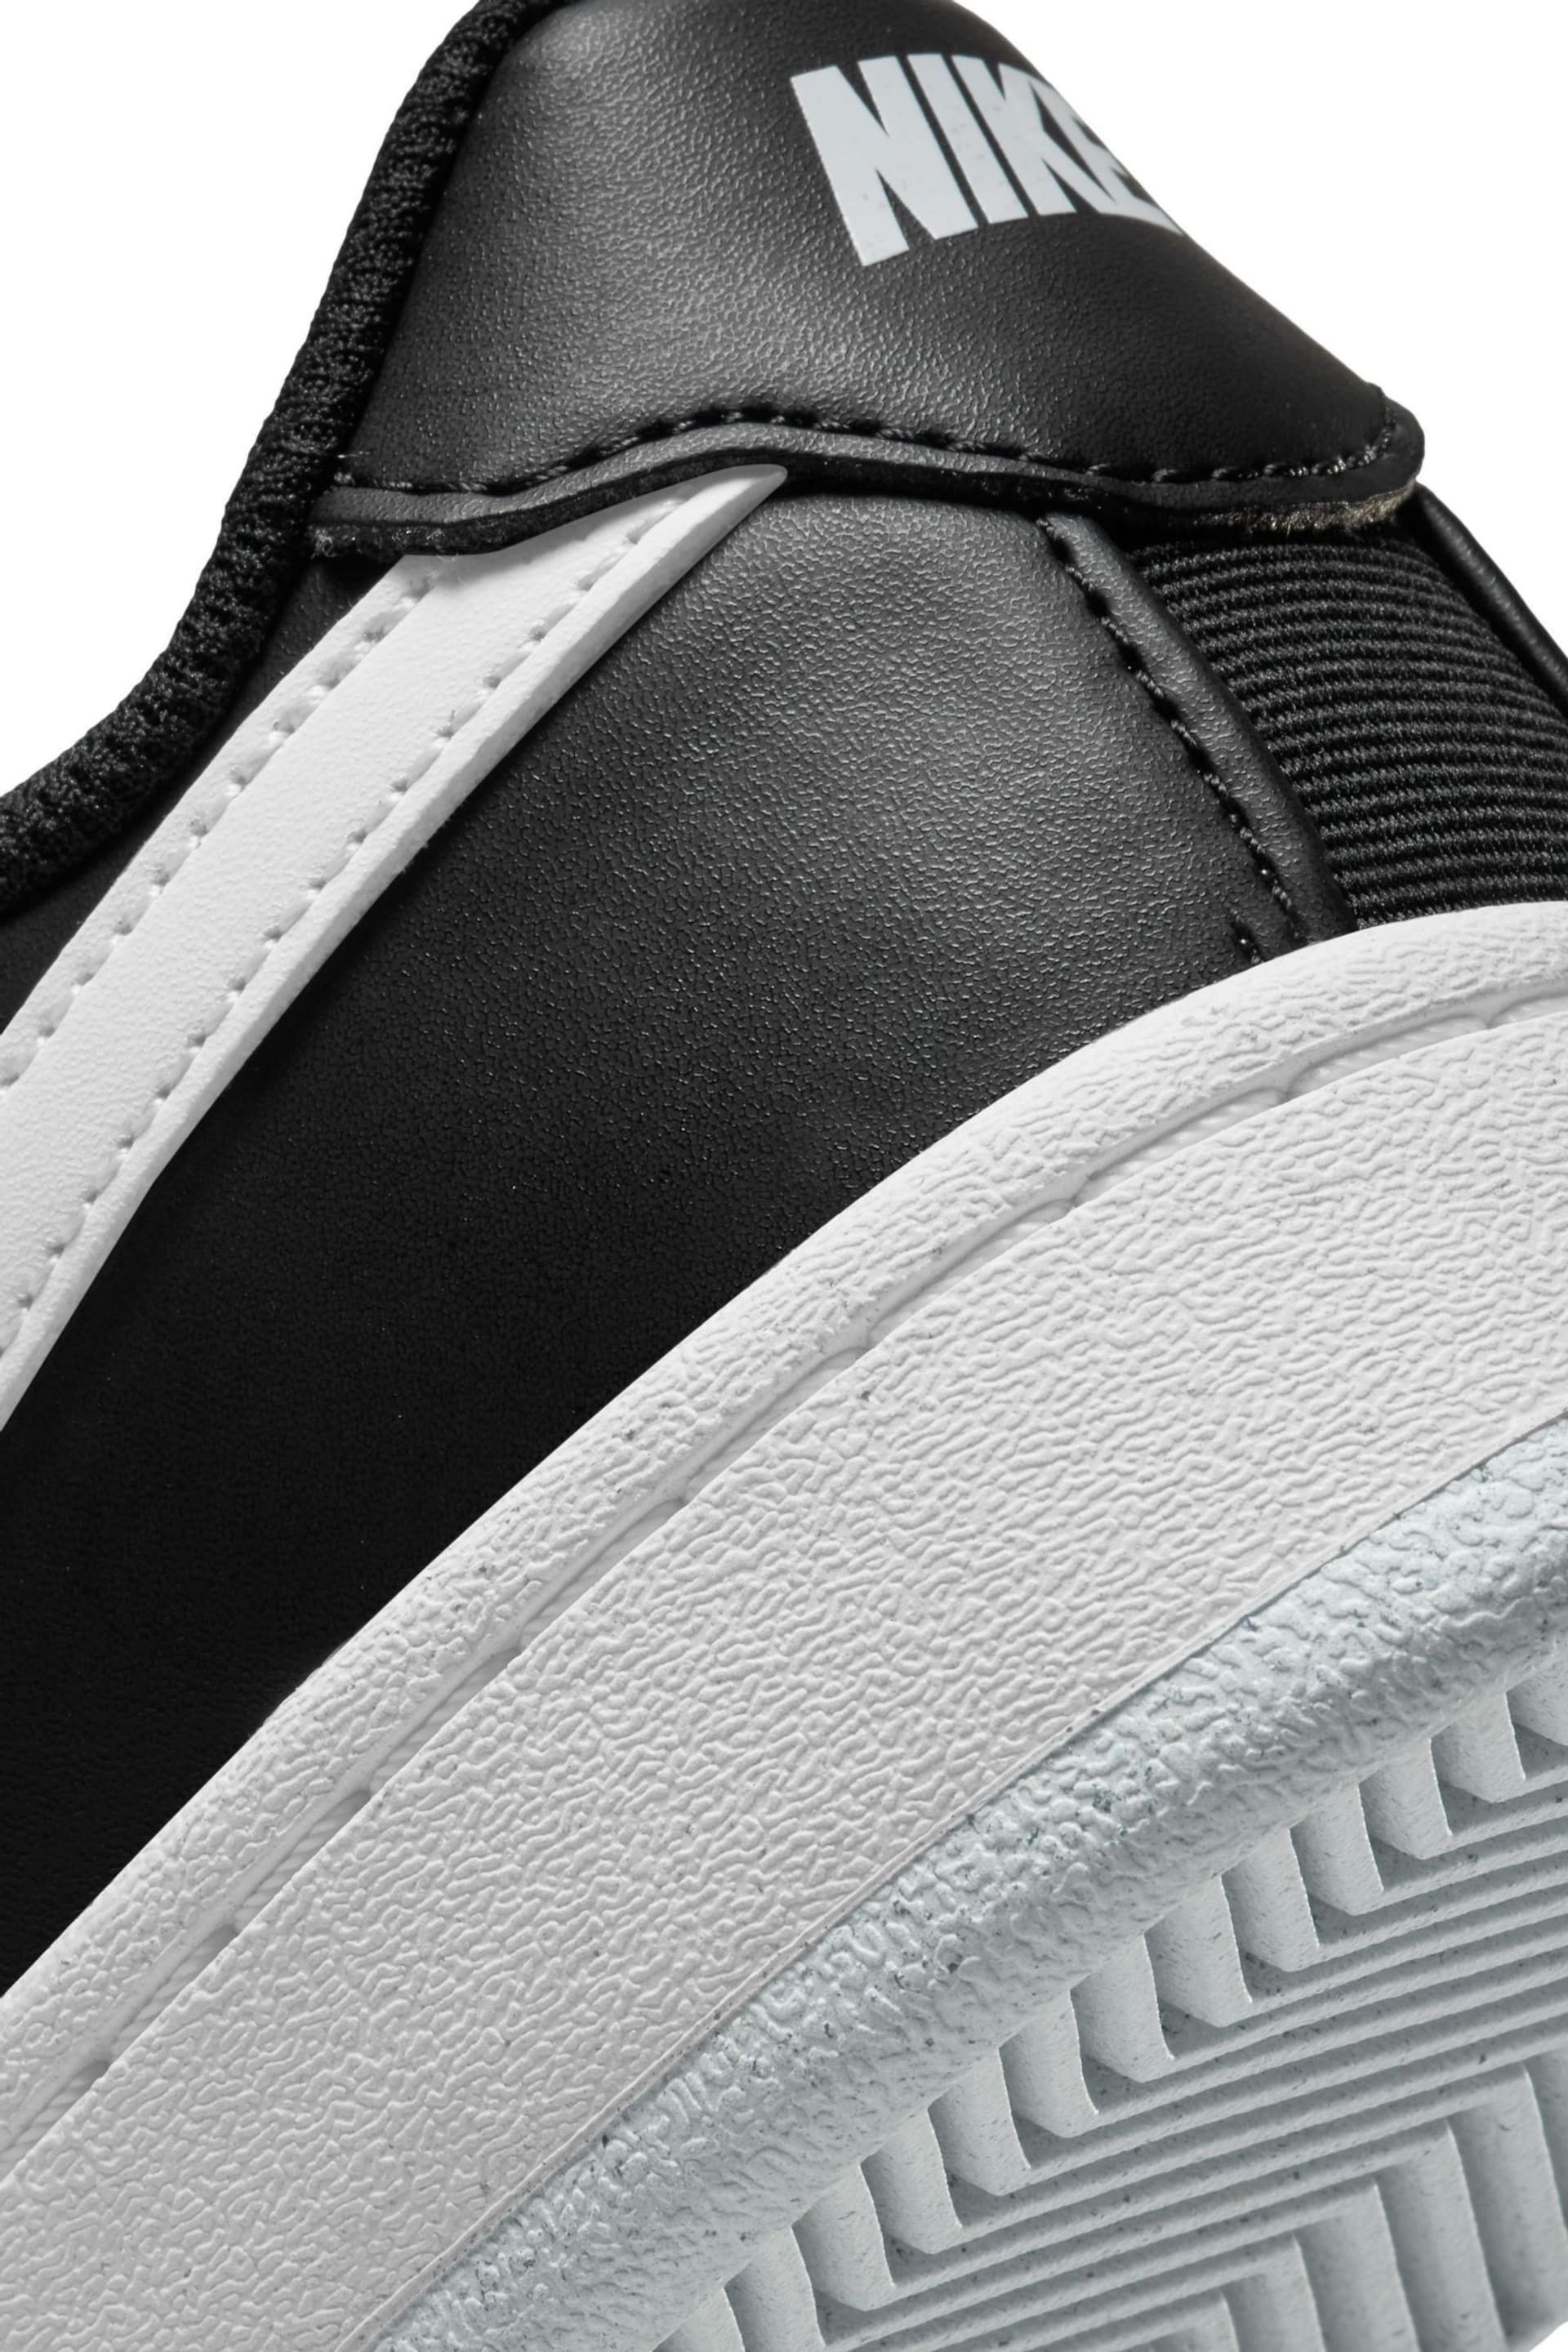 Nike Black Court Royale Trainers - Image 7 of 8